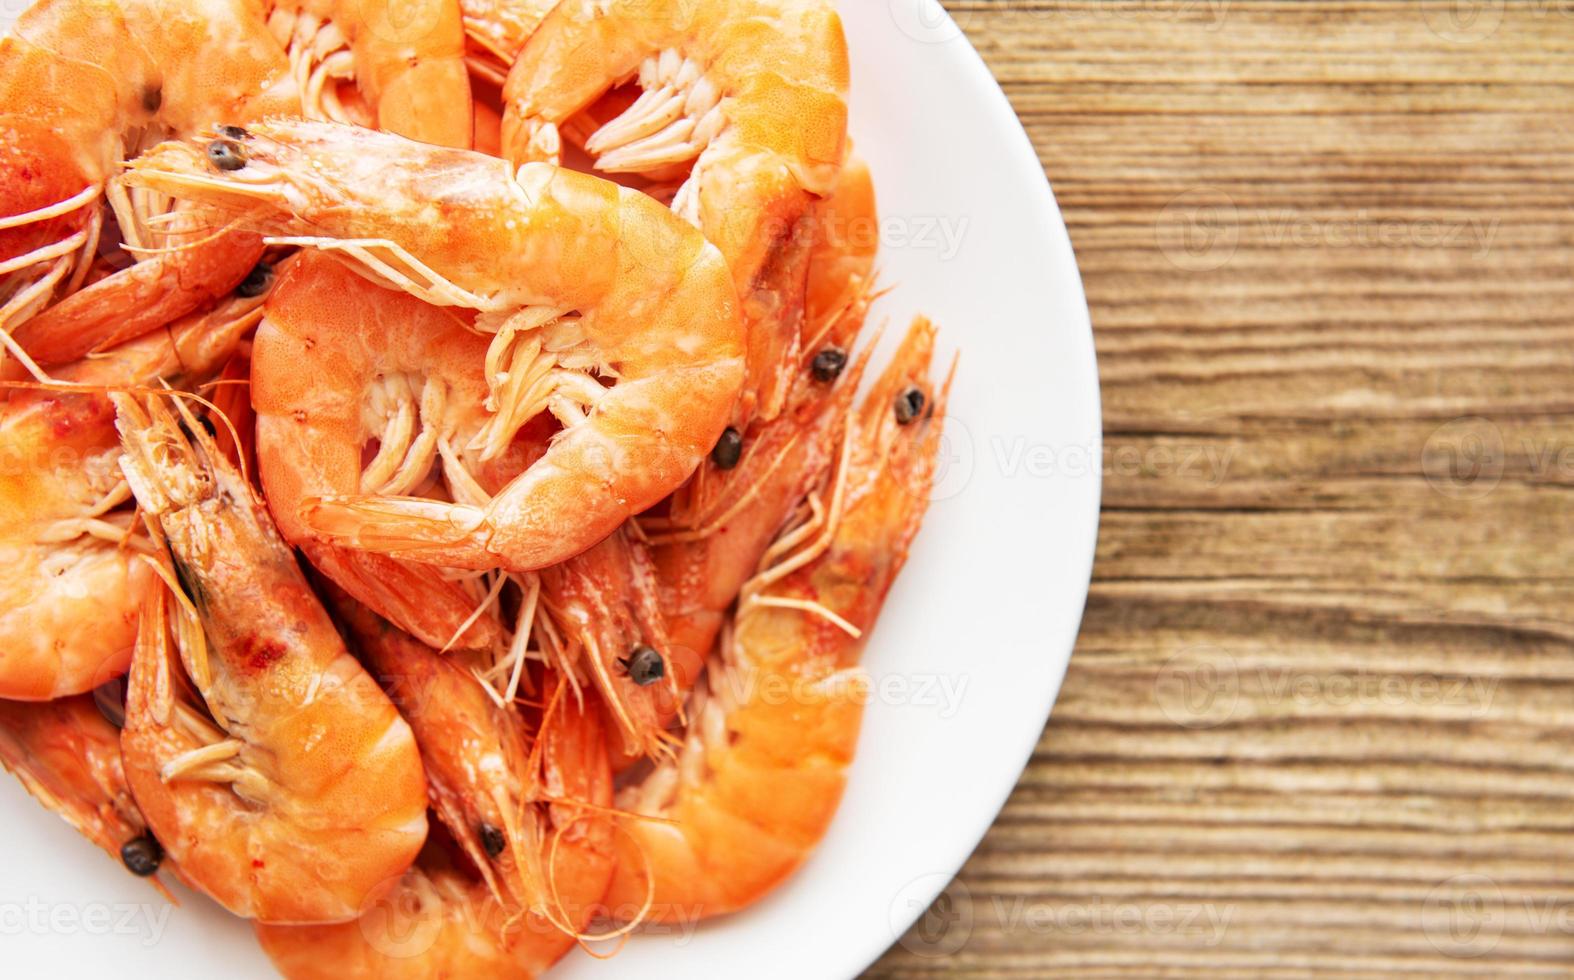 Shrimps served on a plate photo